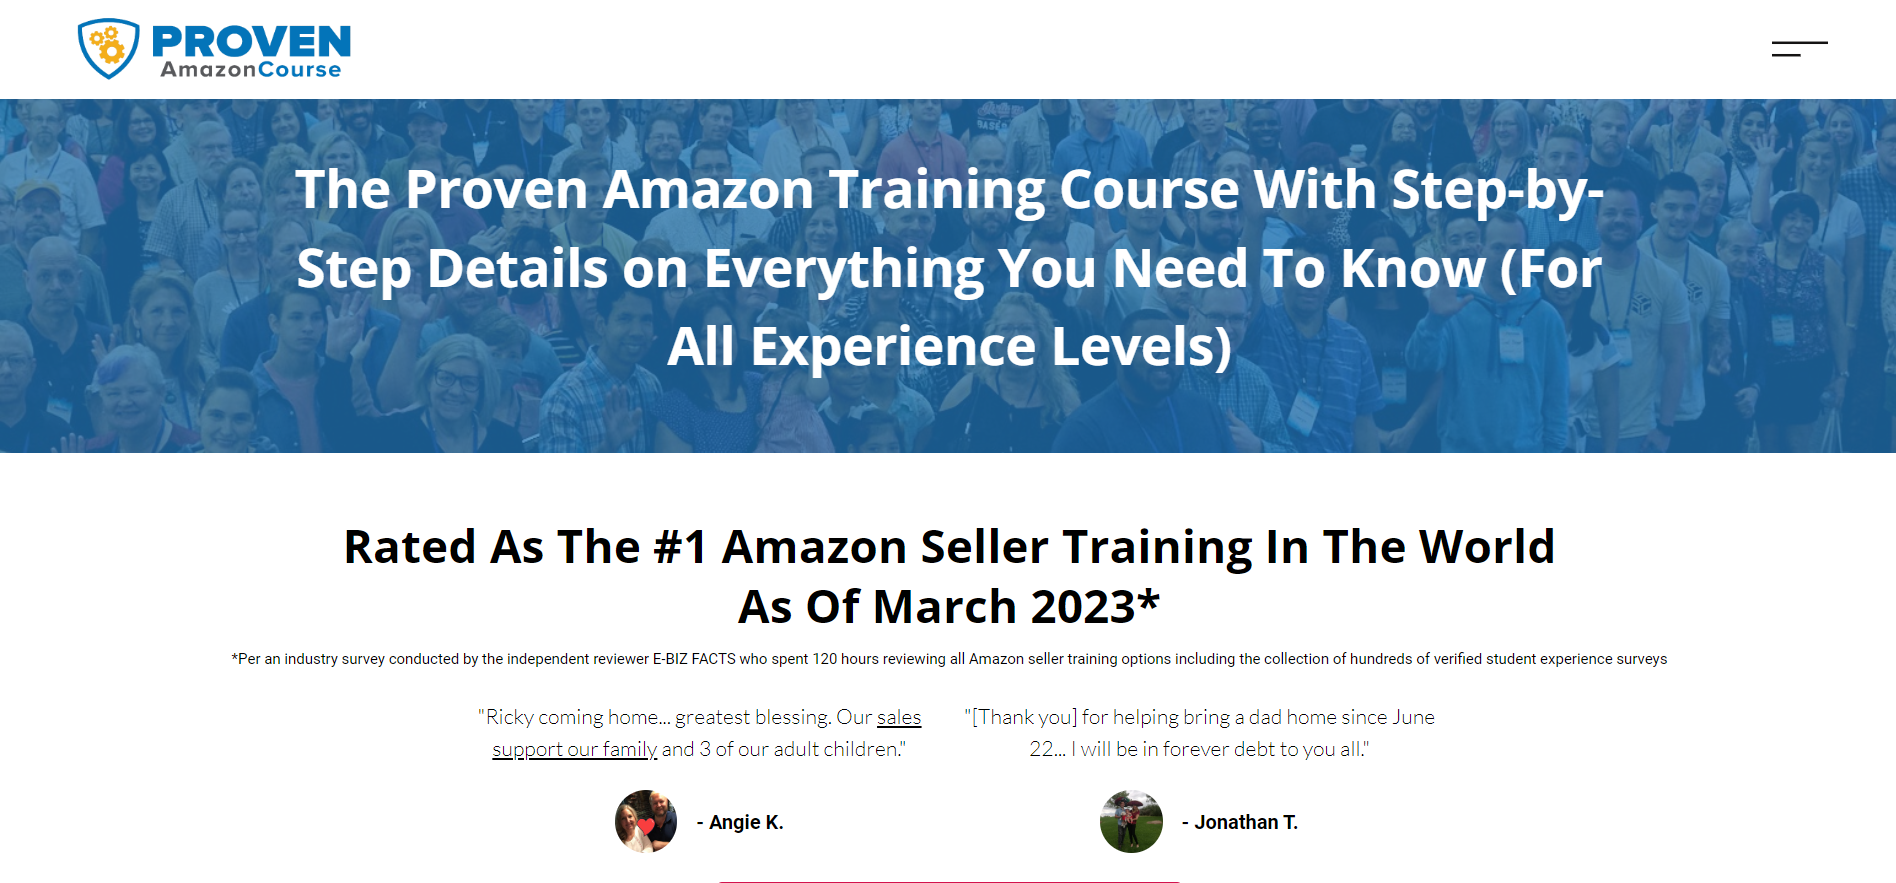 The Proven Amazon Training Course With Step-by-Step Details